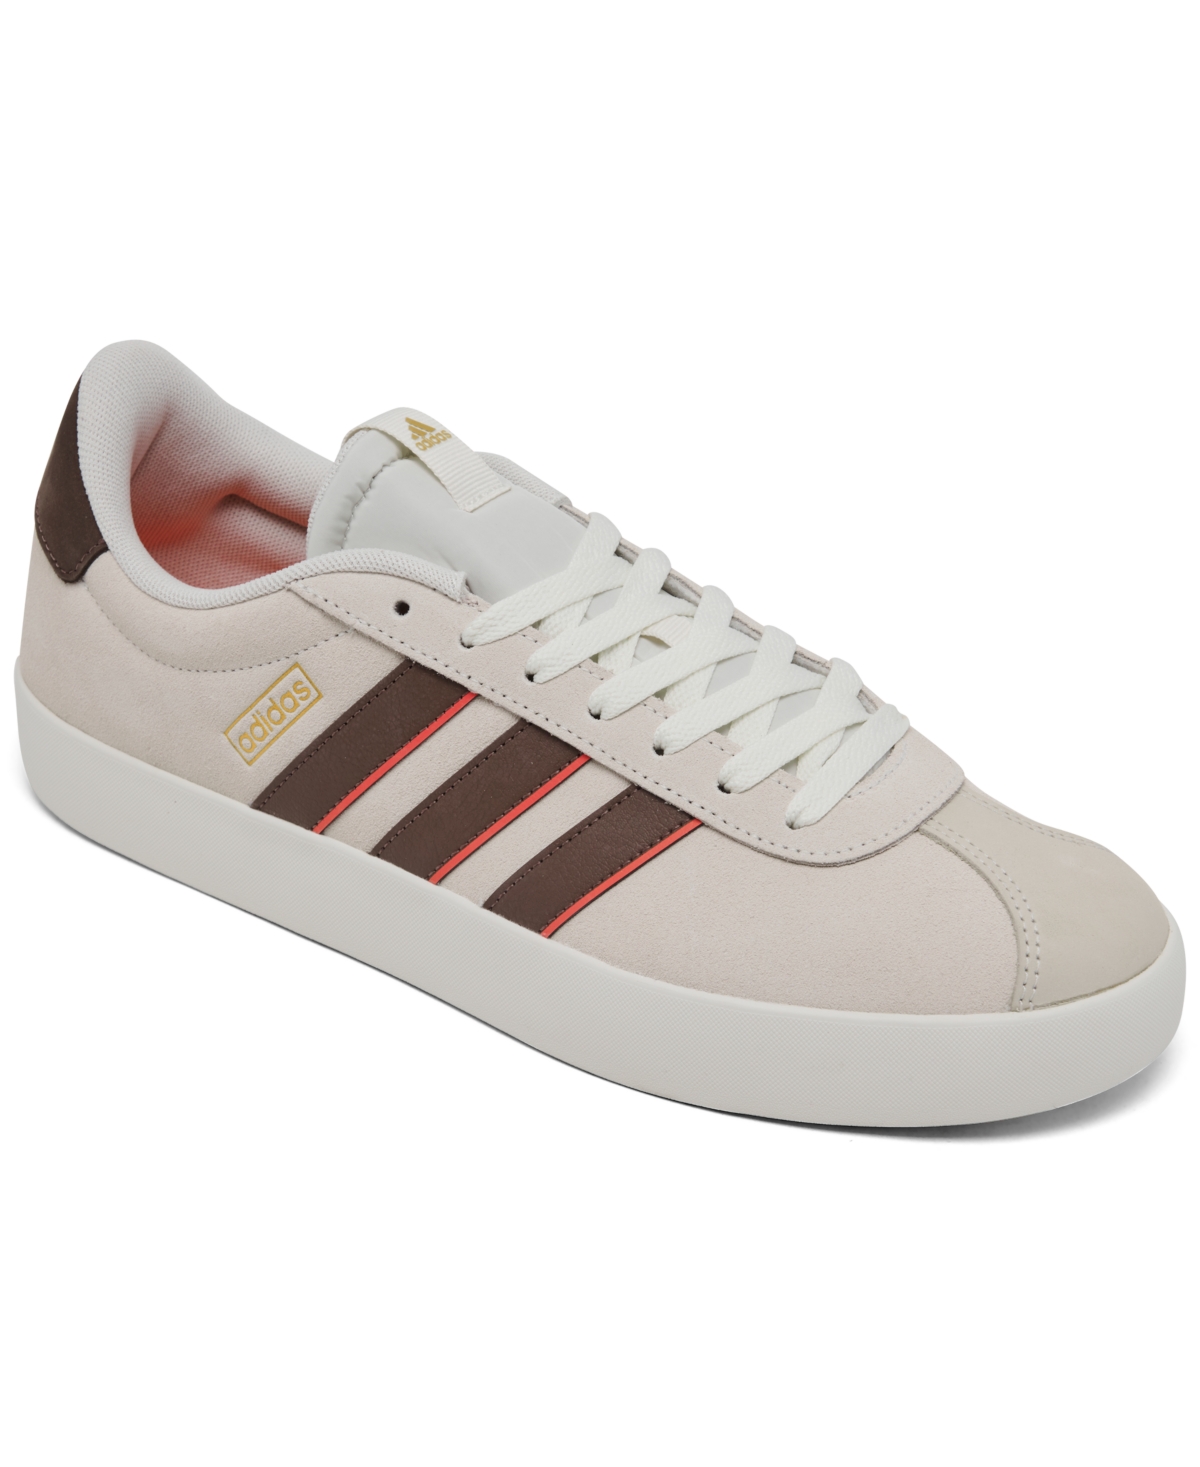 Shop Adidas Originals Men's Vl Court 3.0 Casual Sneakers From Finish Line In Off White,earth Strata,go